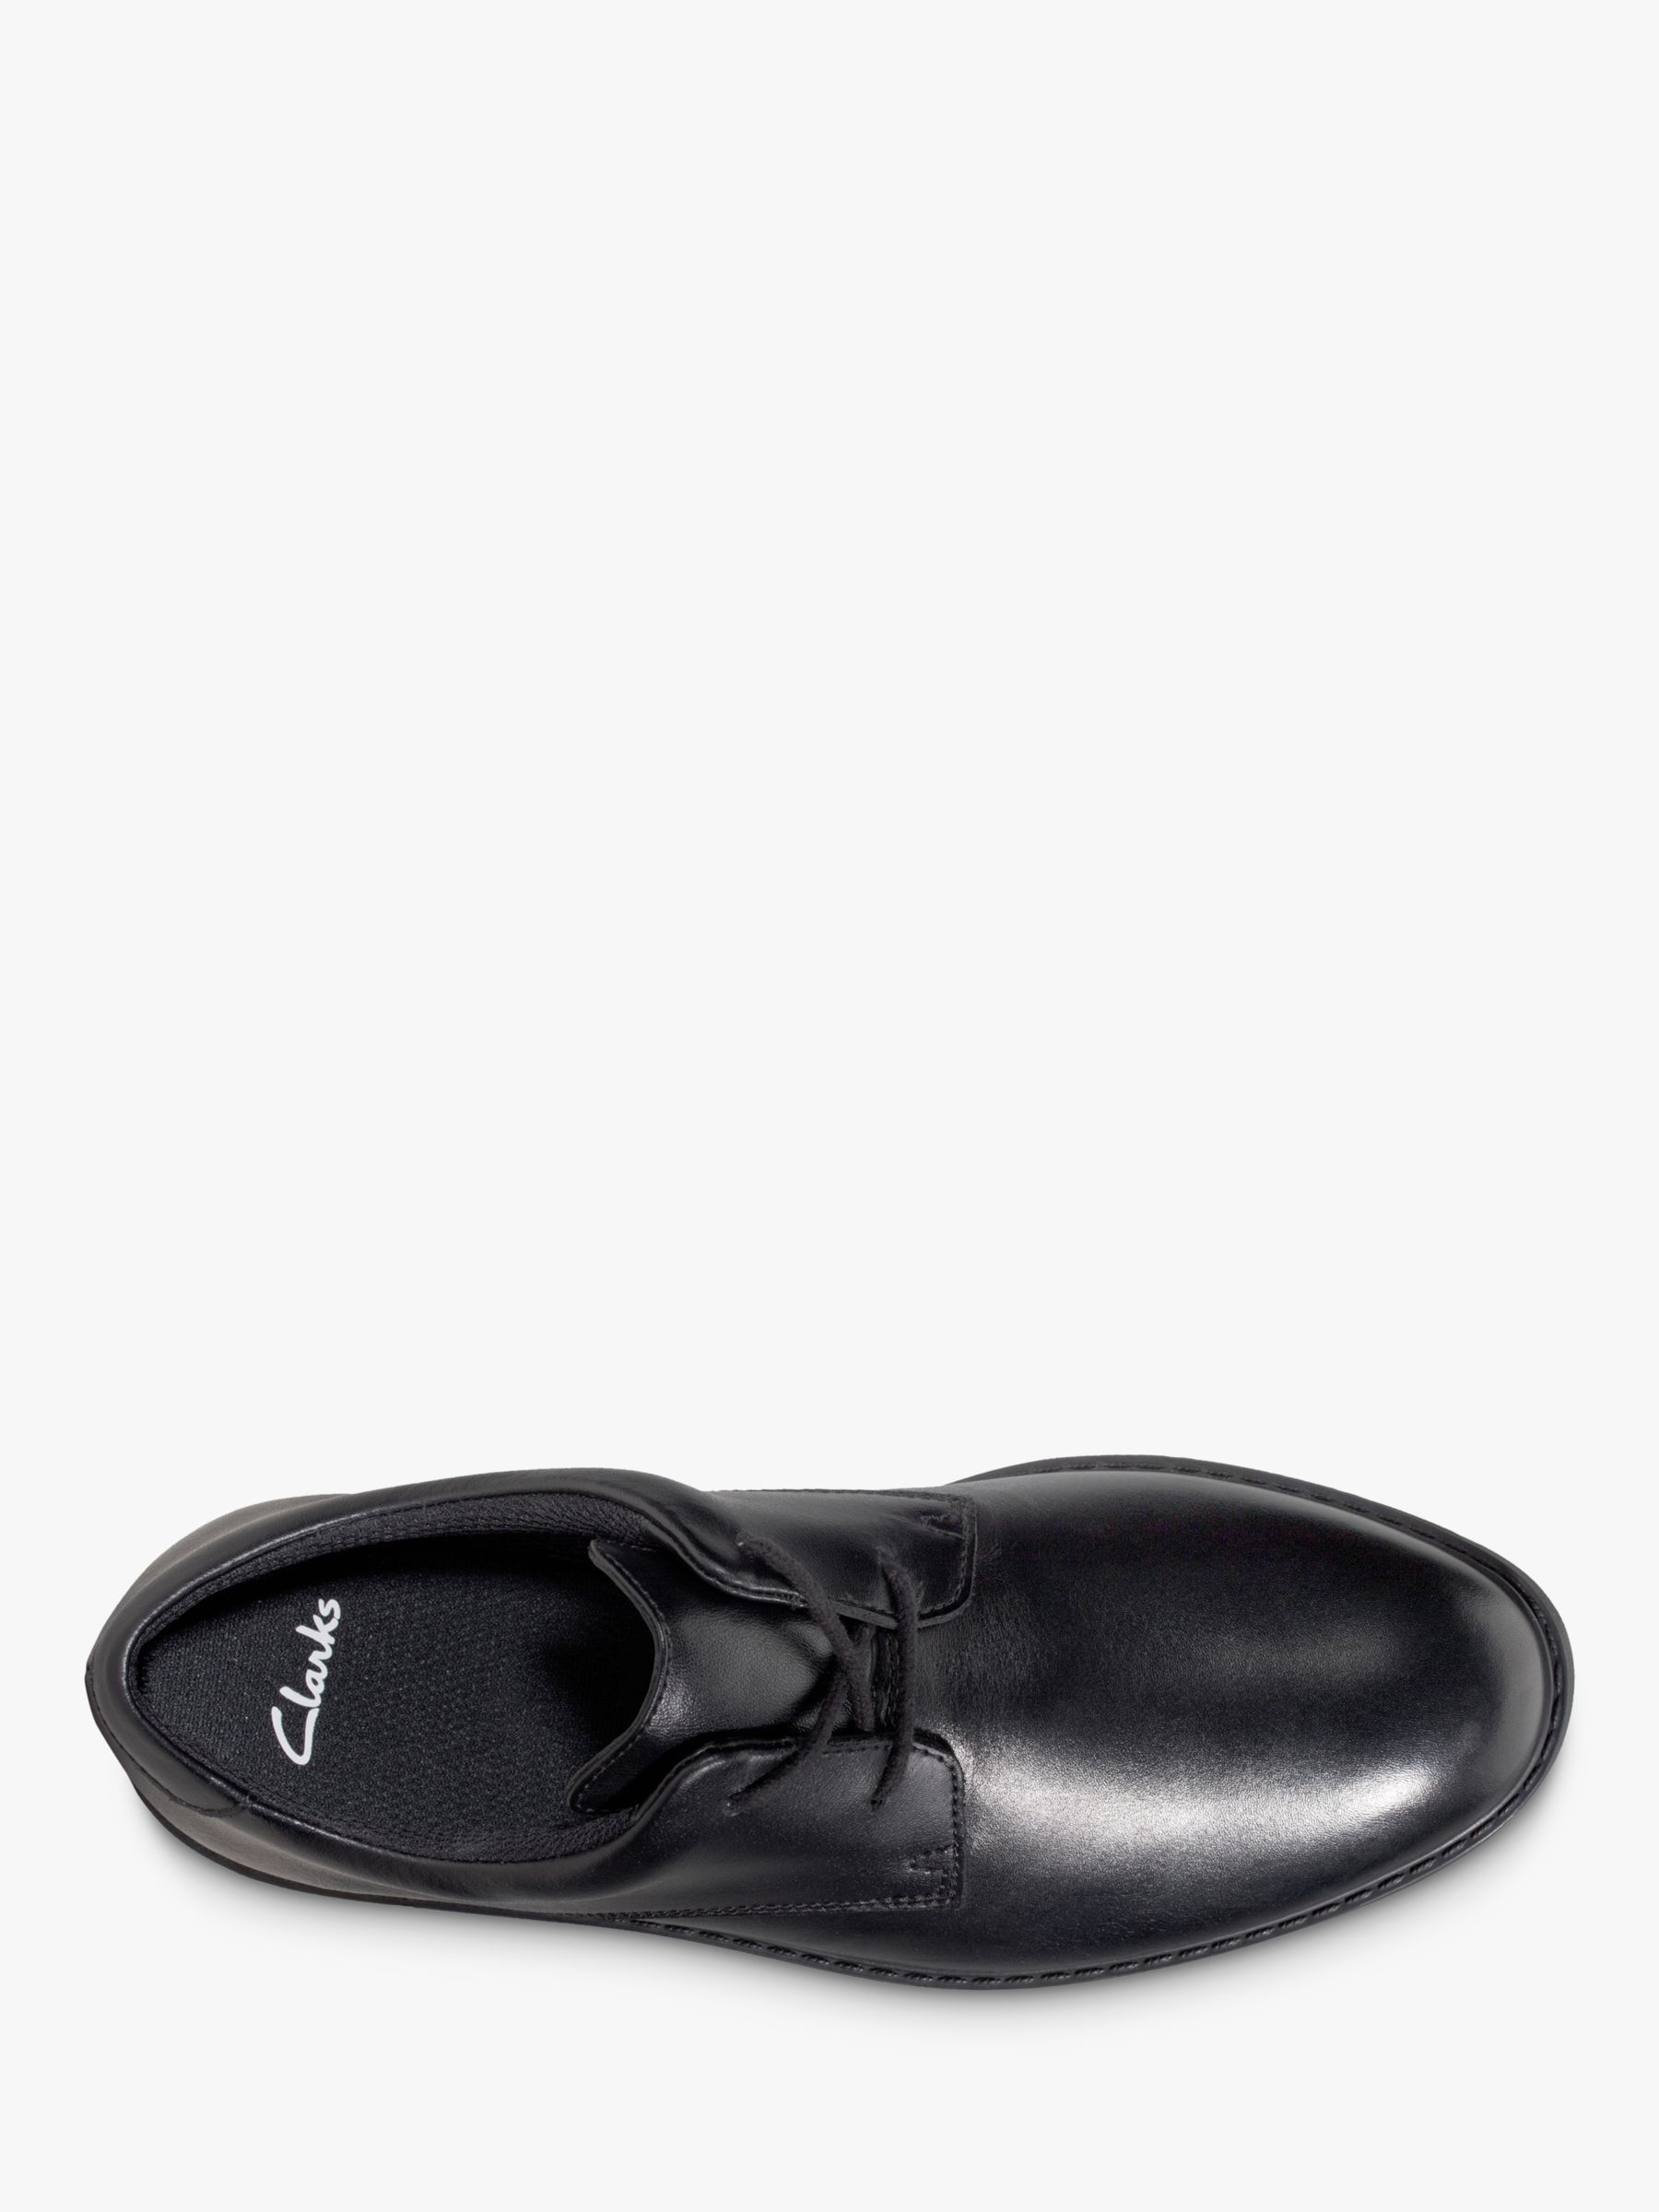 Buy Clarks Kids' Scala Loop Lace Up Leather School Shoes, Black Online at johnlewis.com